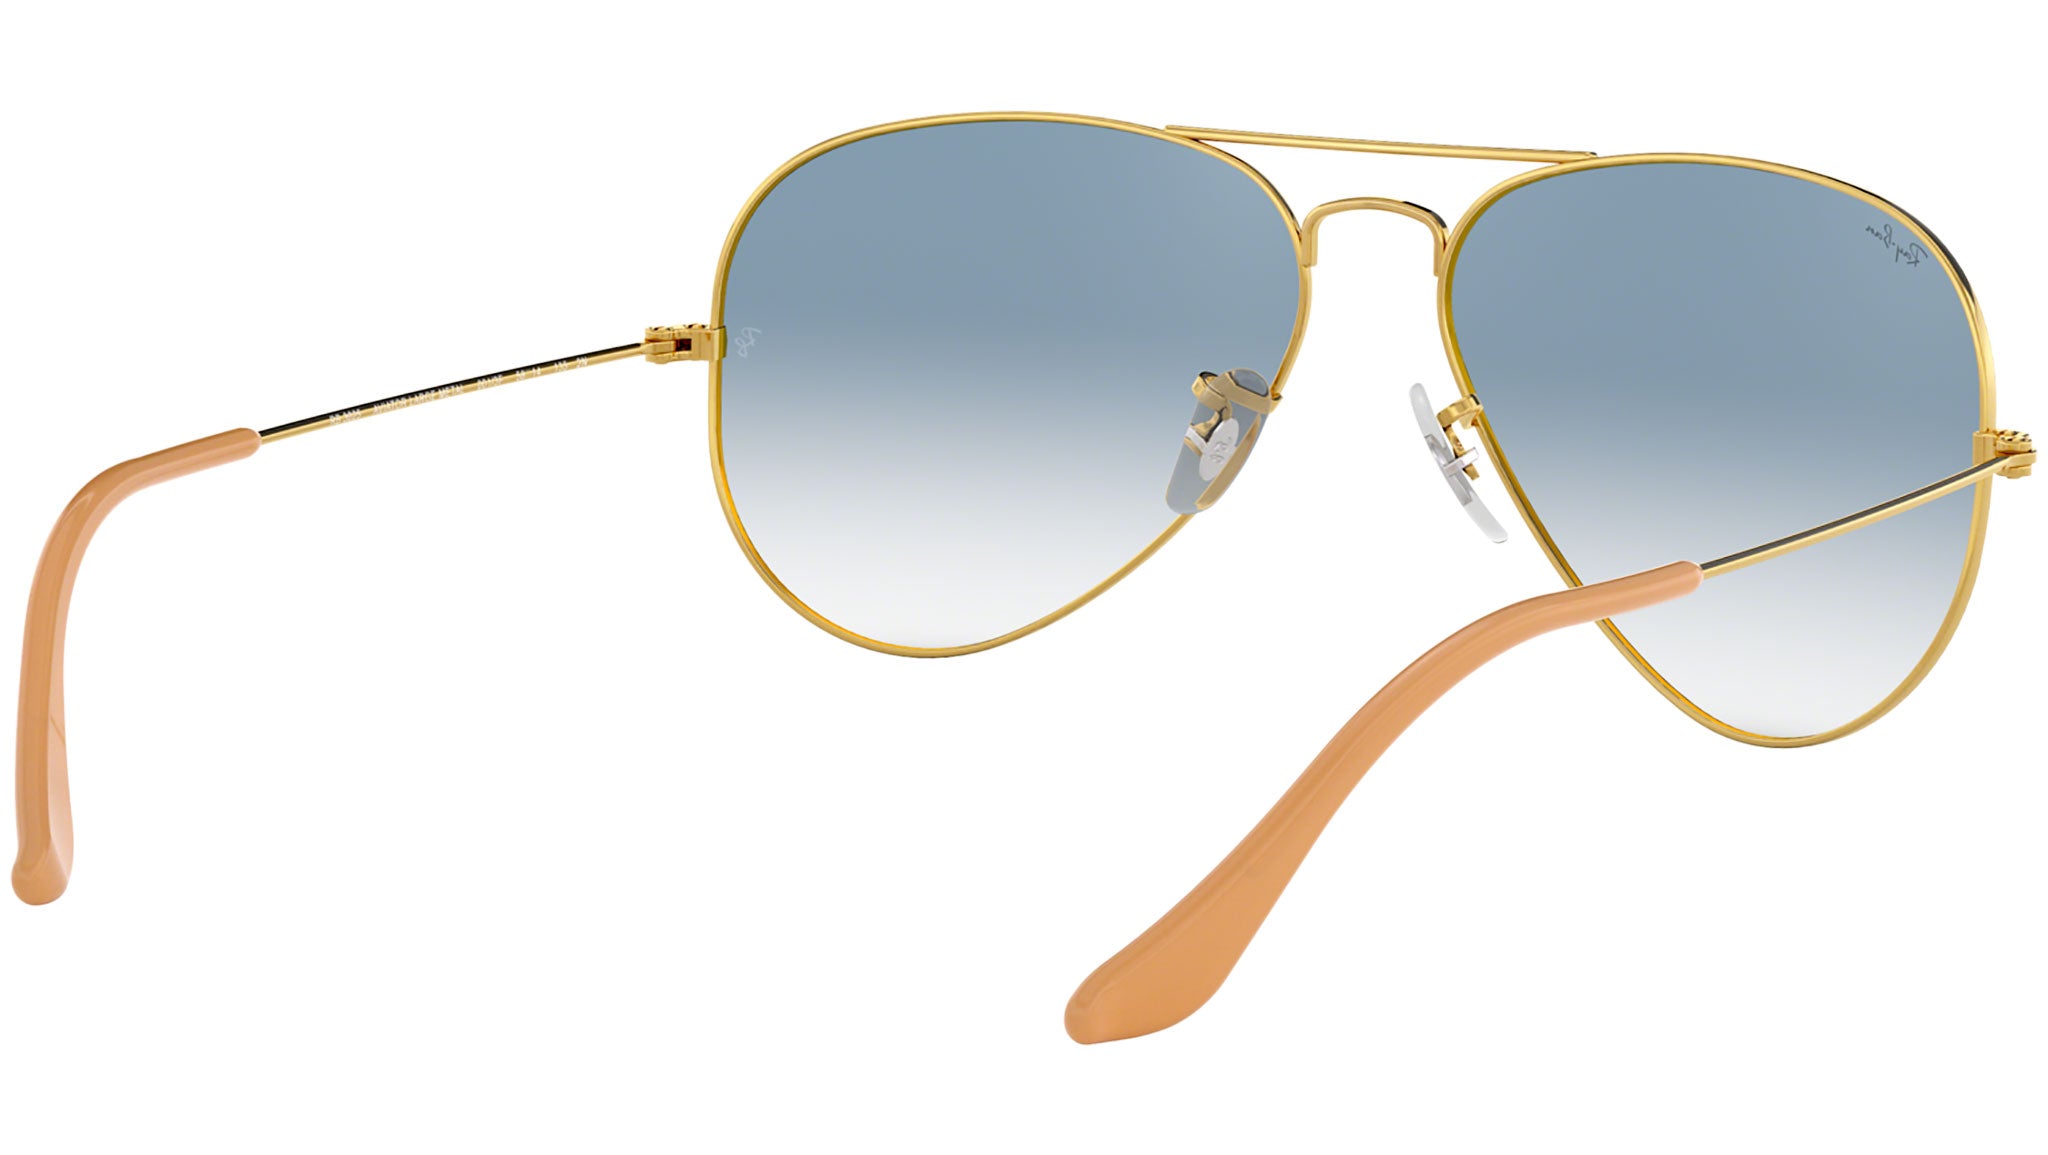 AVIATOR GRADIENT Sunglasses in Gold and Light Blue - RB3025